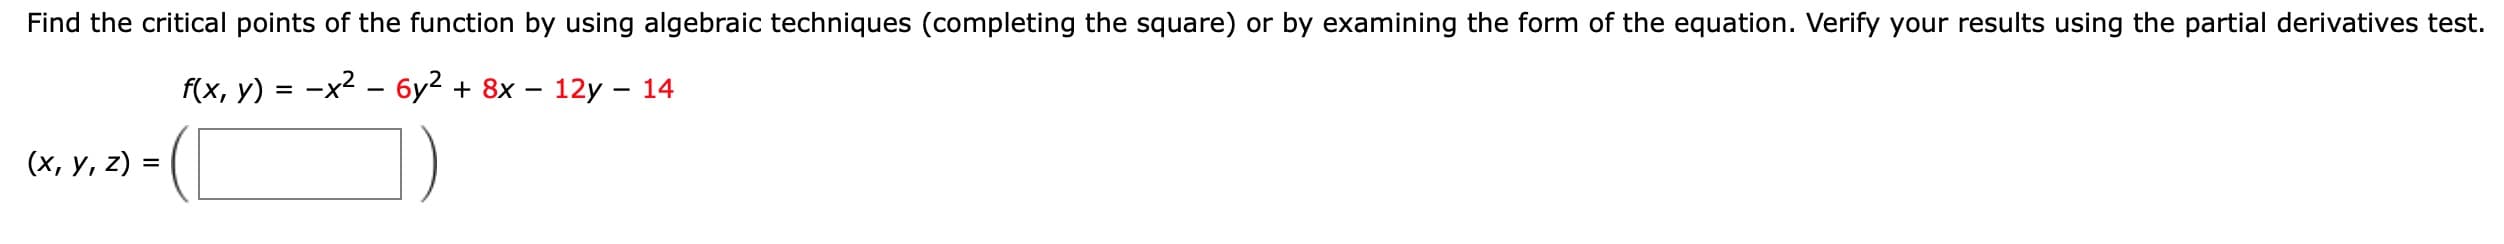 Find the critical points of the function by using algebraic techniques (completing the square) or by examining the form of the equation. Verify your results using the partial derivatives test.
f(x, у) %3D —х? — бу? + 8x — 12у — 14
(х, у, 2) %3D
